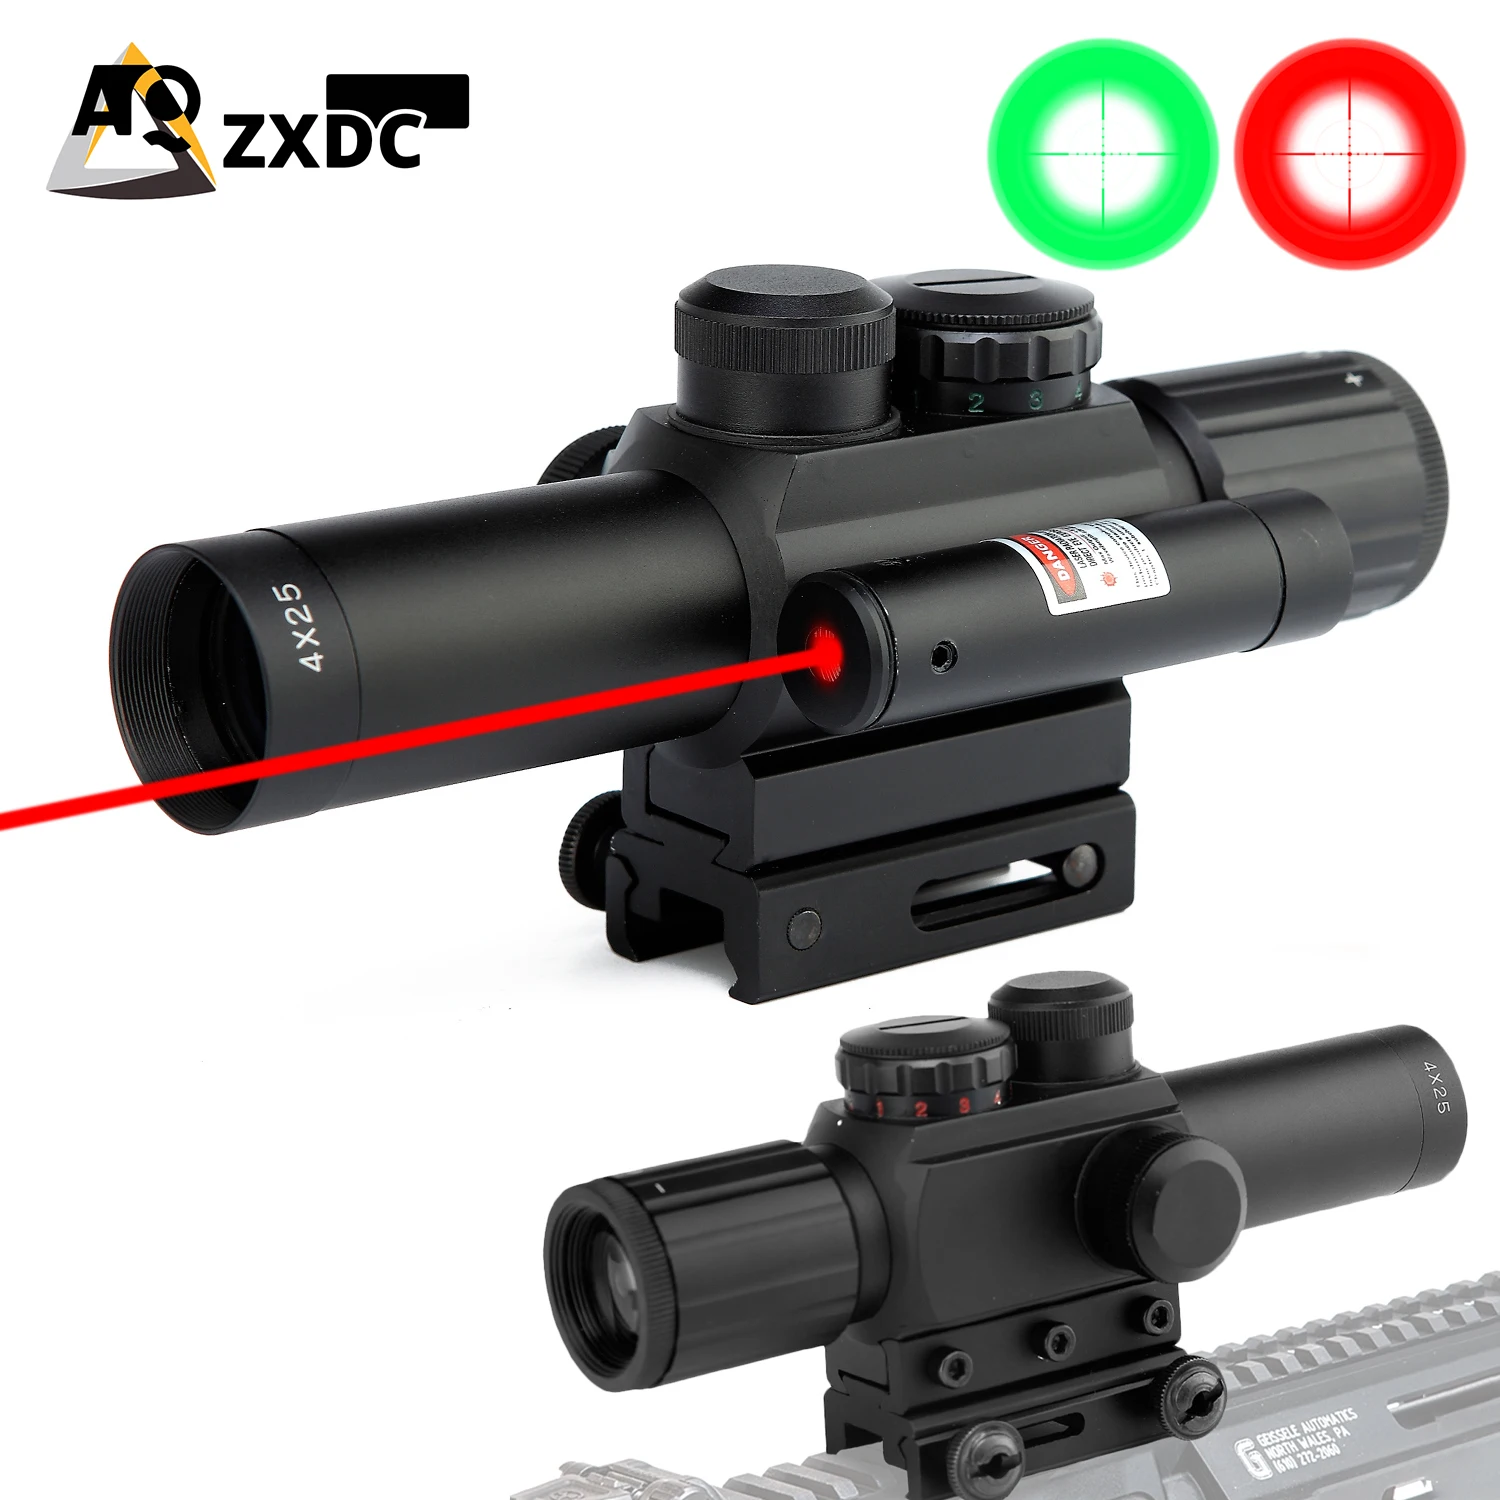 

4x25 M6 laser sight 4x magnifying glass telescope airsoft hunting scope adjustable and detachable for 22cm rail